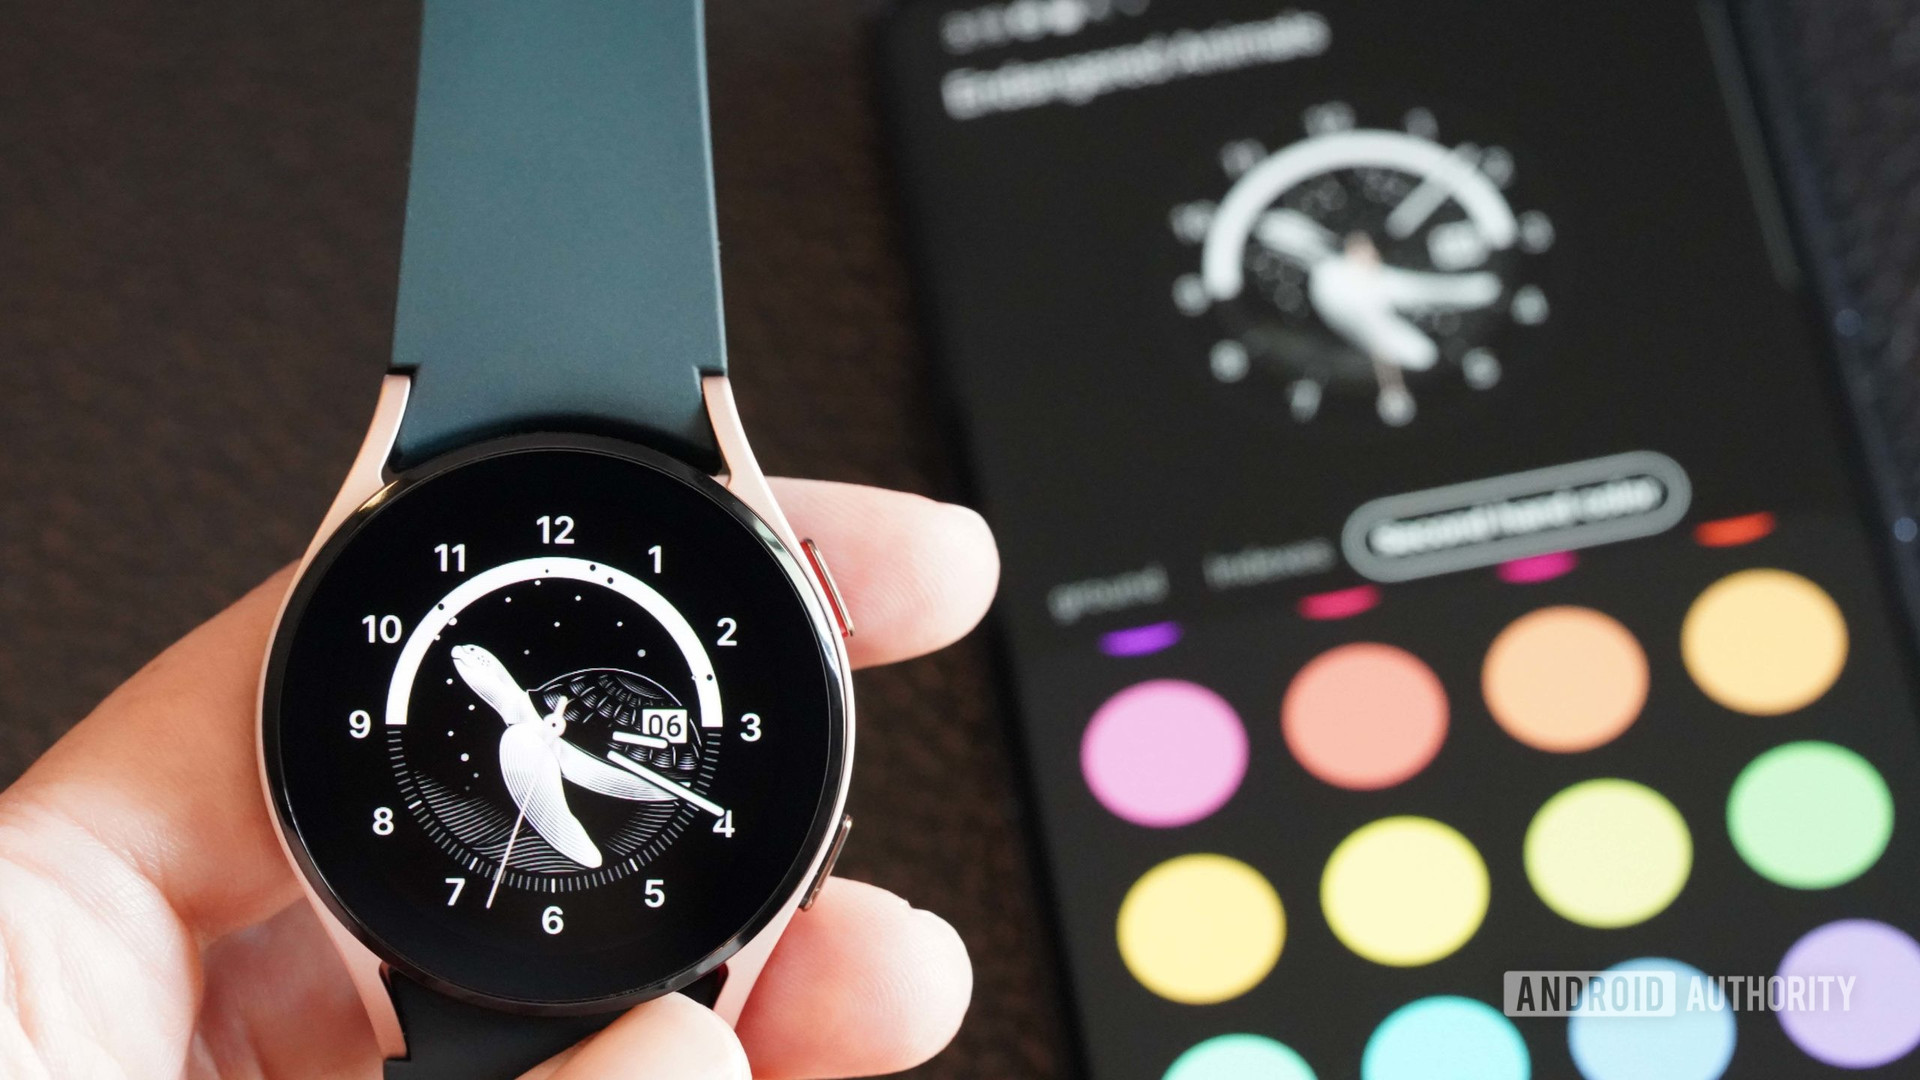 User sets custom colors to the galaxy watch 4 endangered animals watch face.